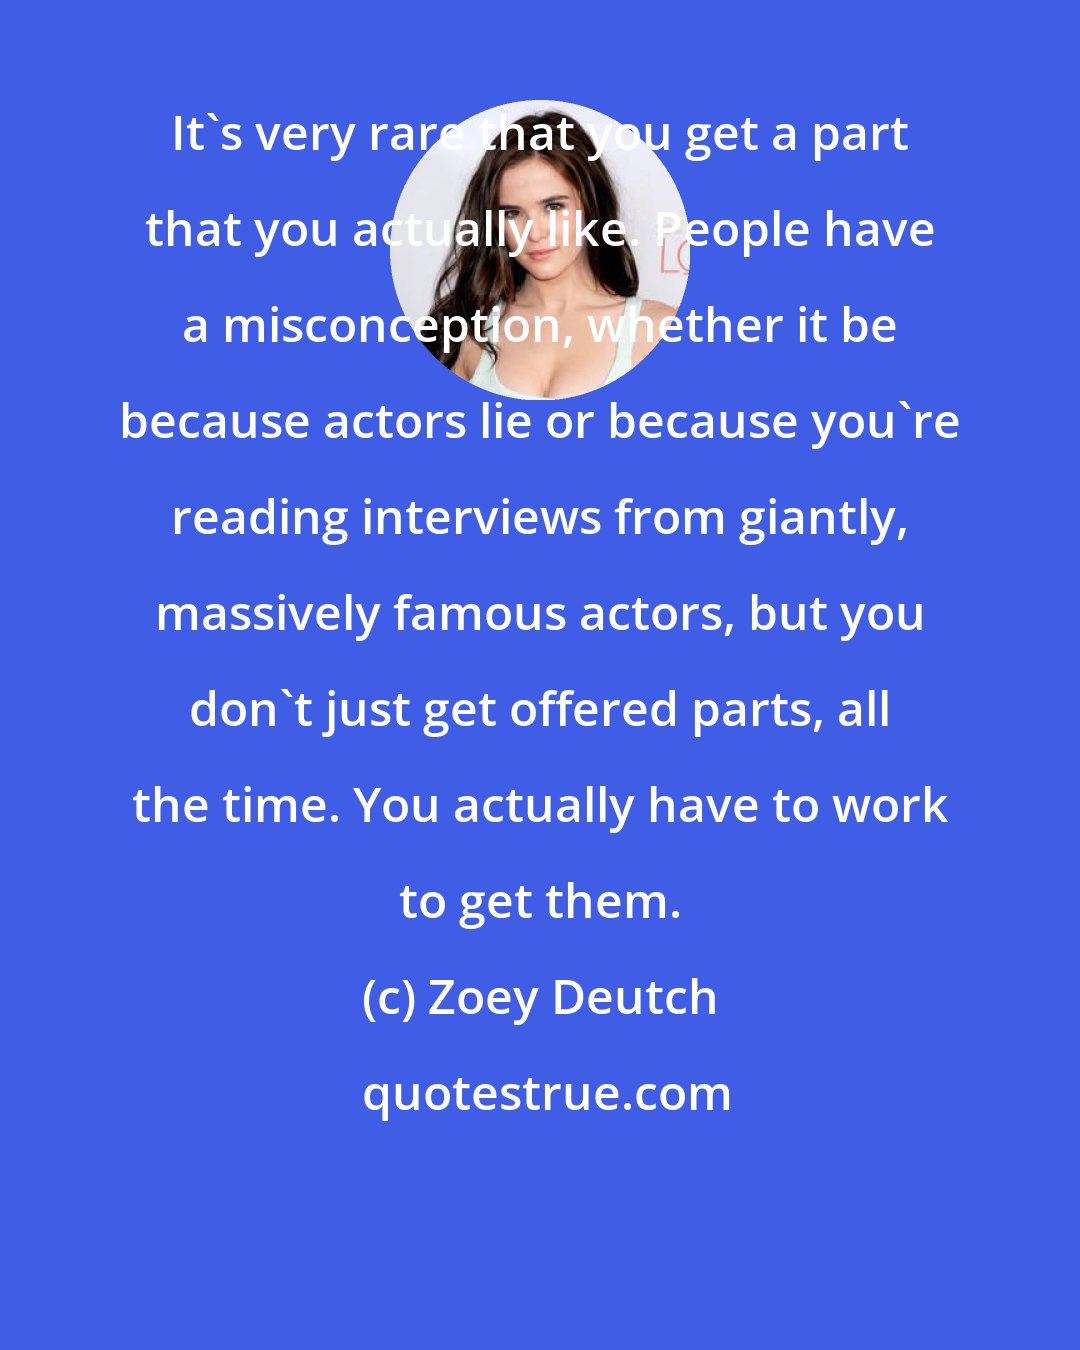 Zoey Deutch: It's very rare that you get a part that you actually like. People have a misconception, whether it be because actors lie or because you're reading interviews from giantly, massively famous actors, but you don't just get offered parts, all the time. You actually have to work to get them.